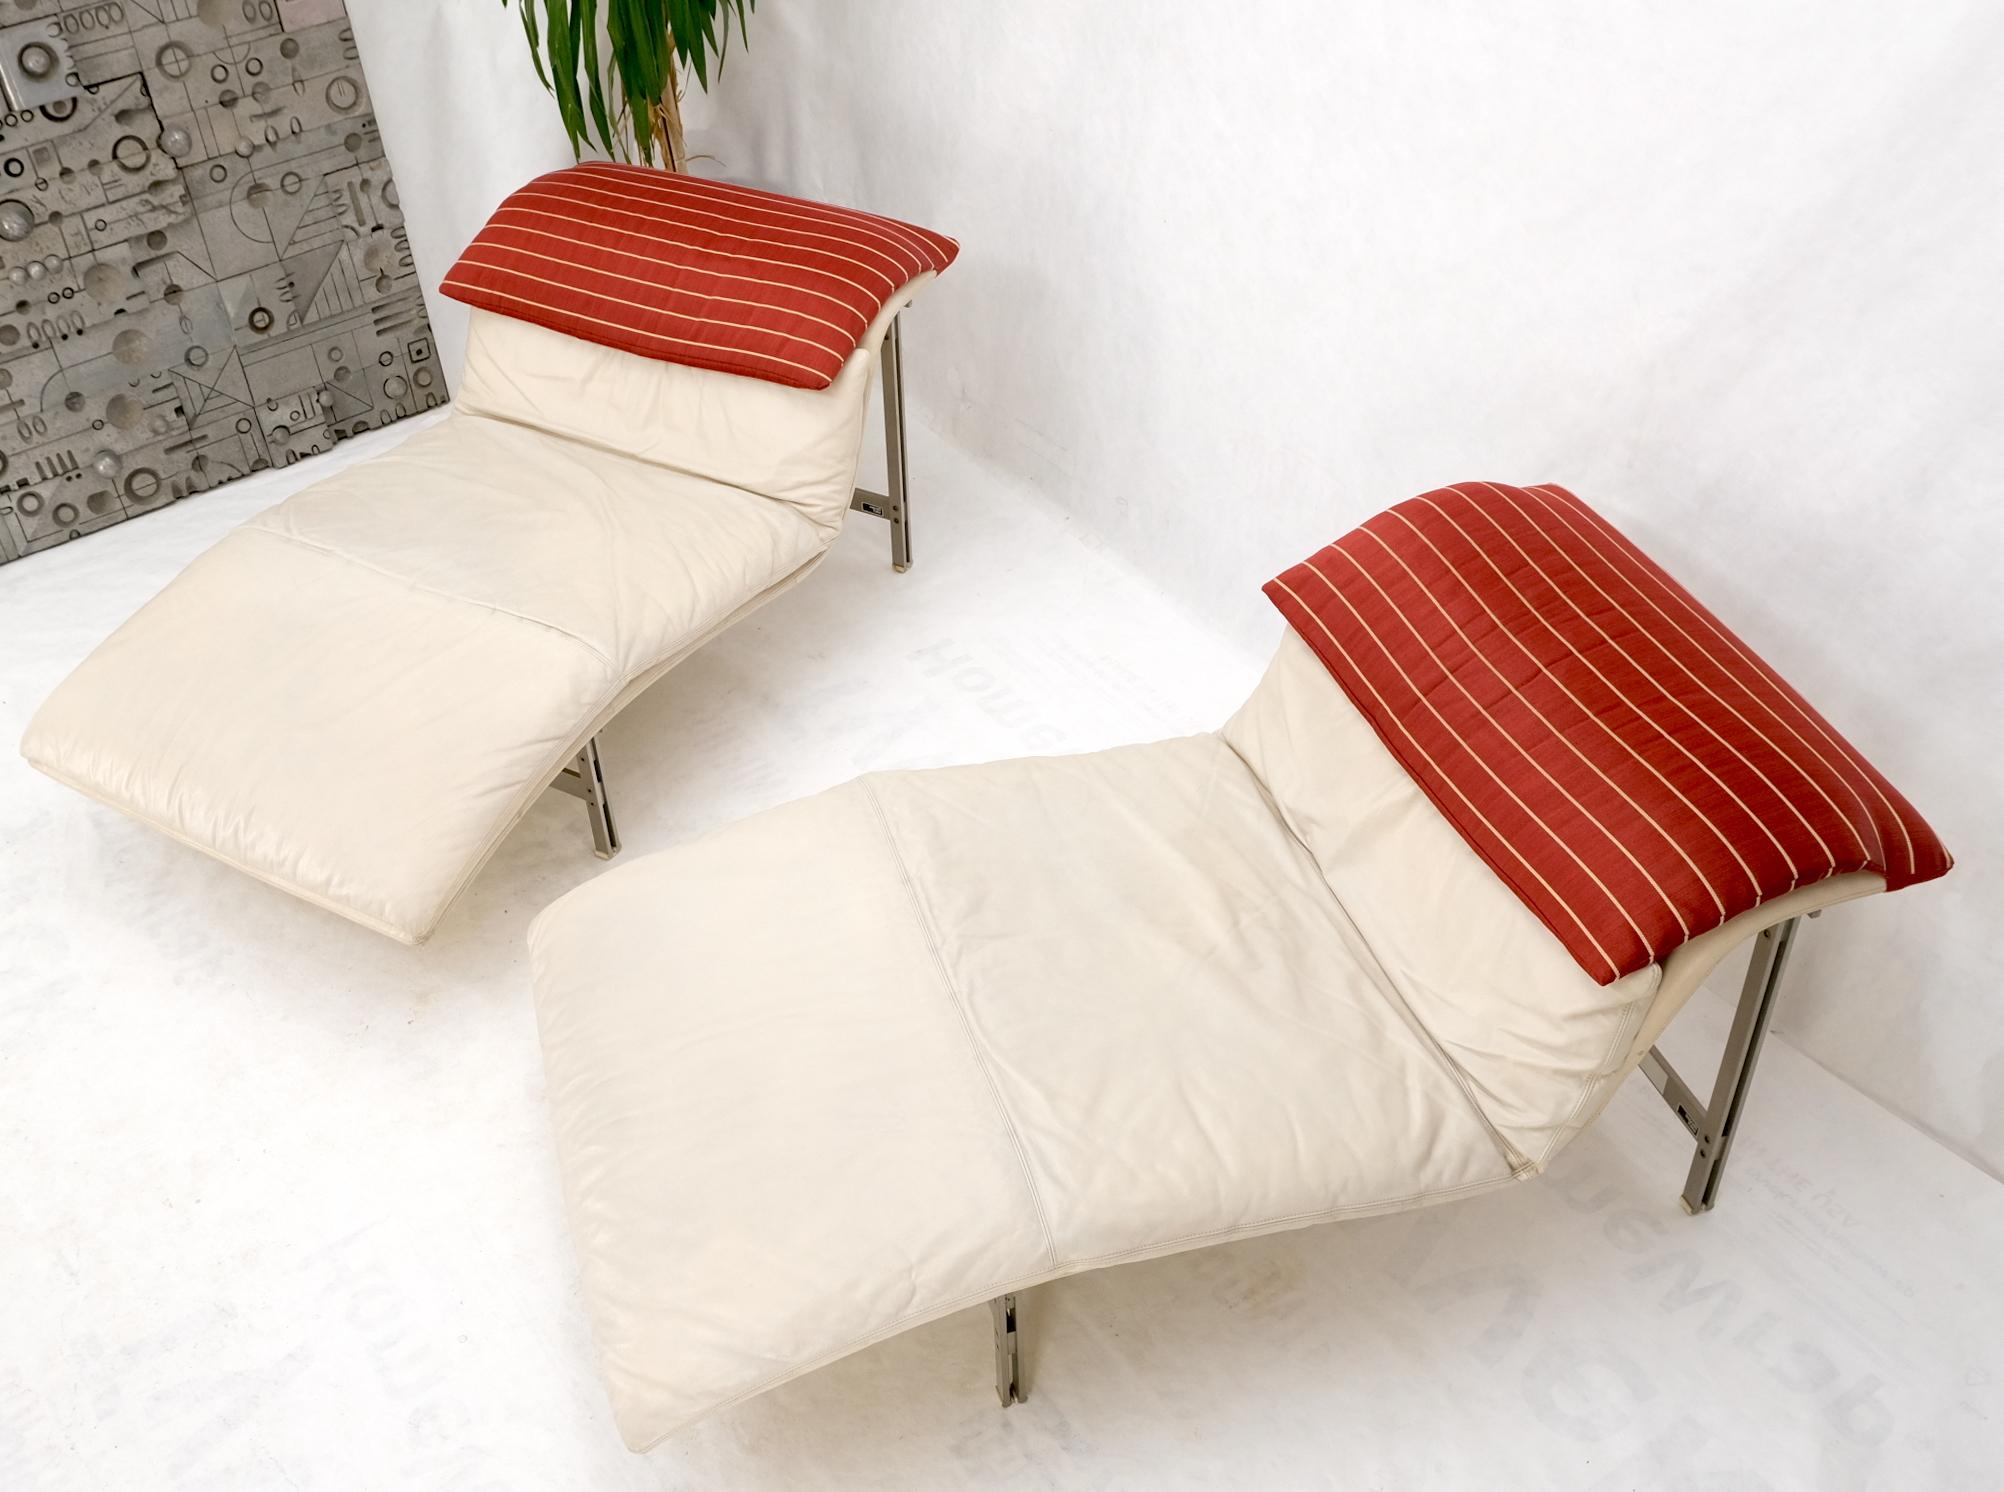 20th Century Pair of Sapority Italian Mid Century Modern Leather Chaise Lounges For Sale